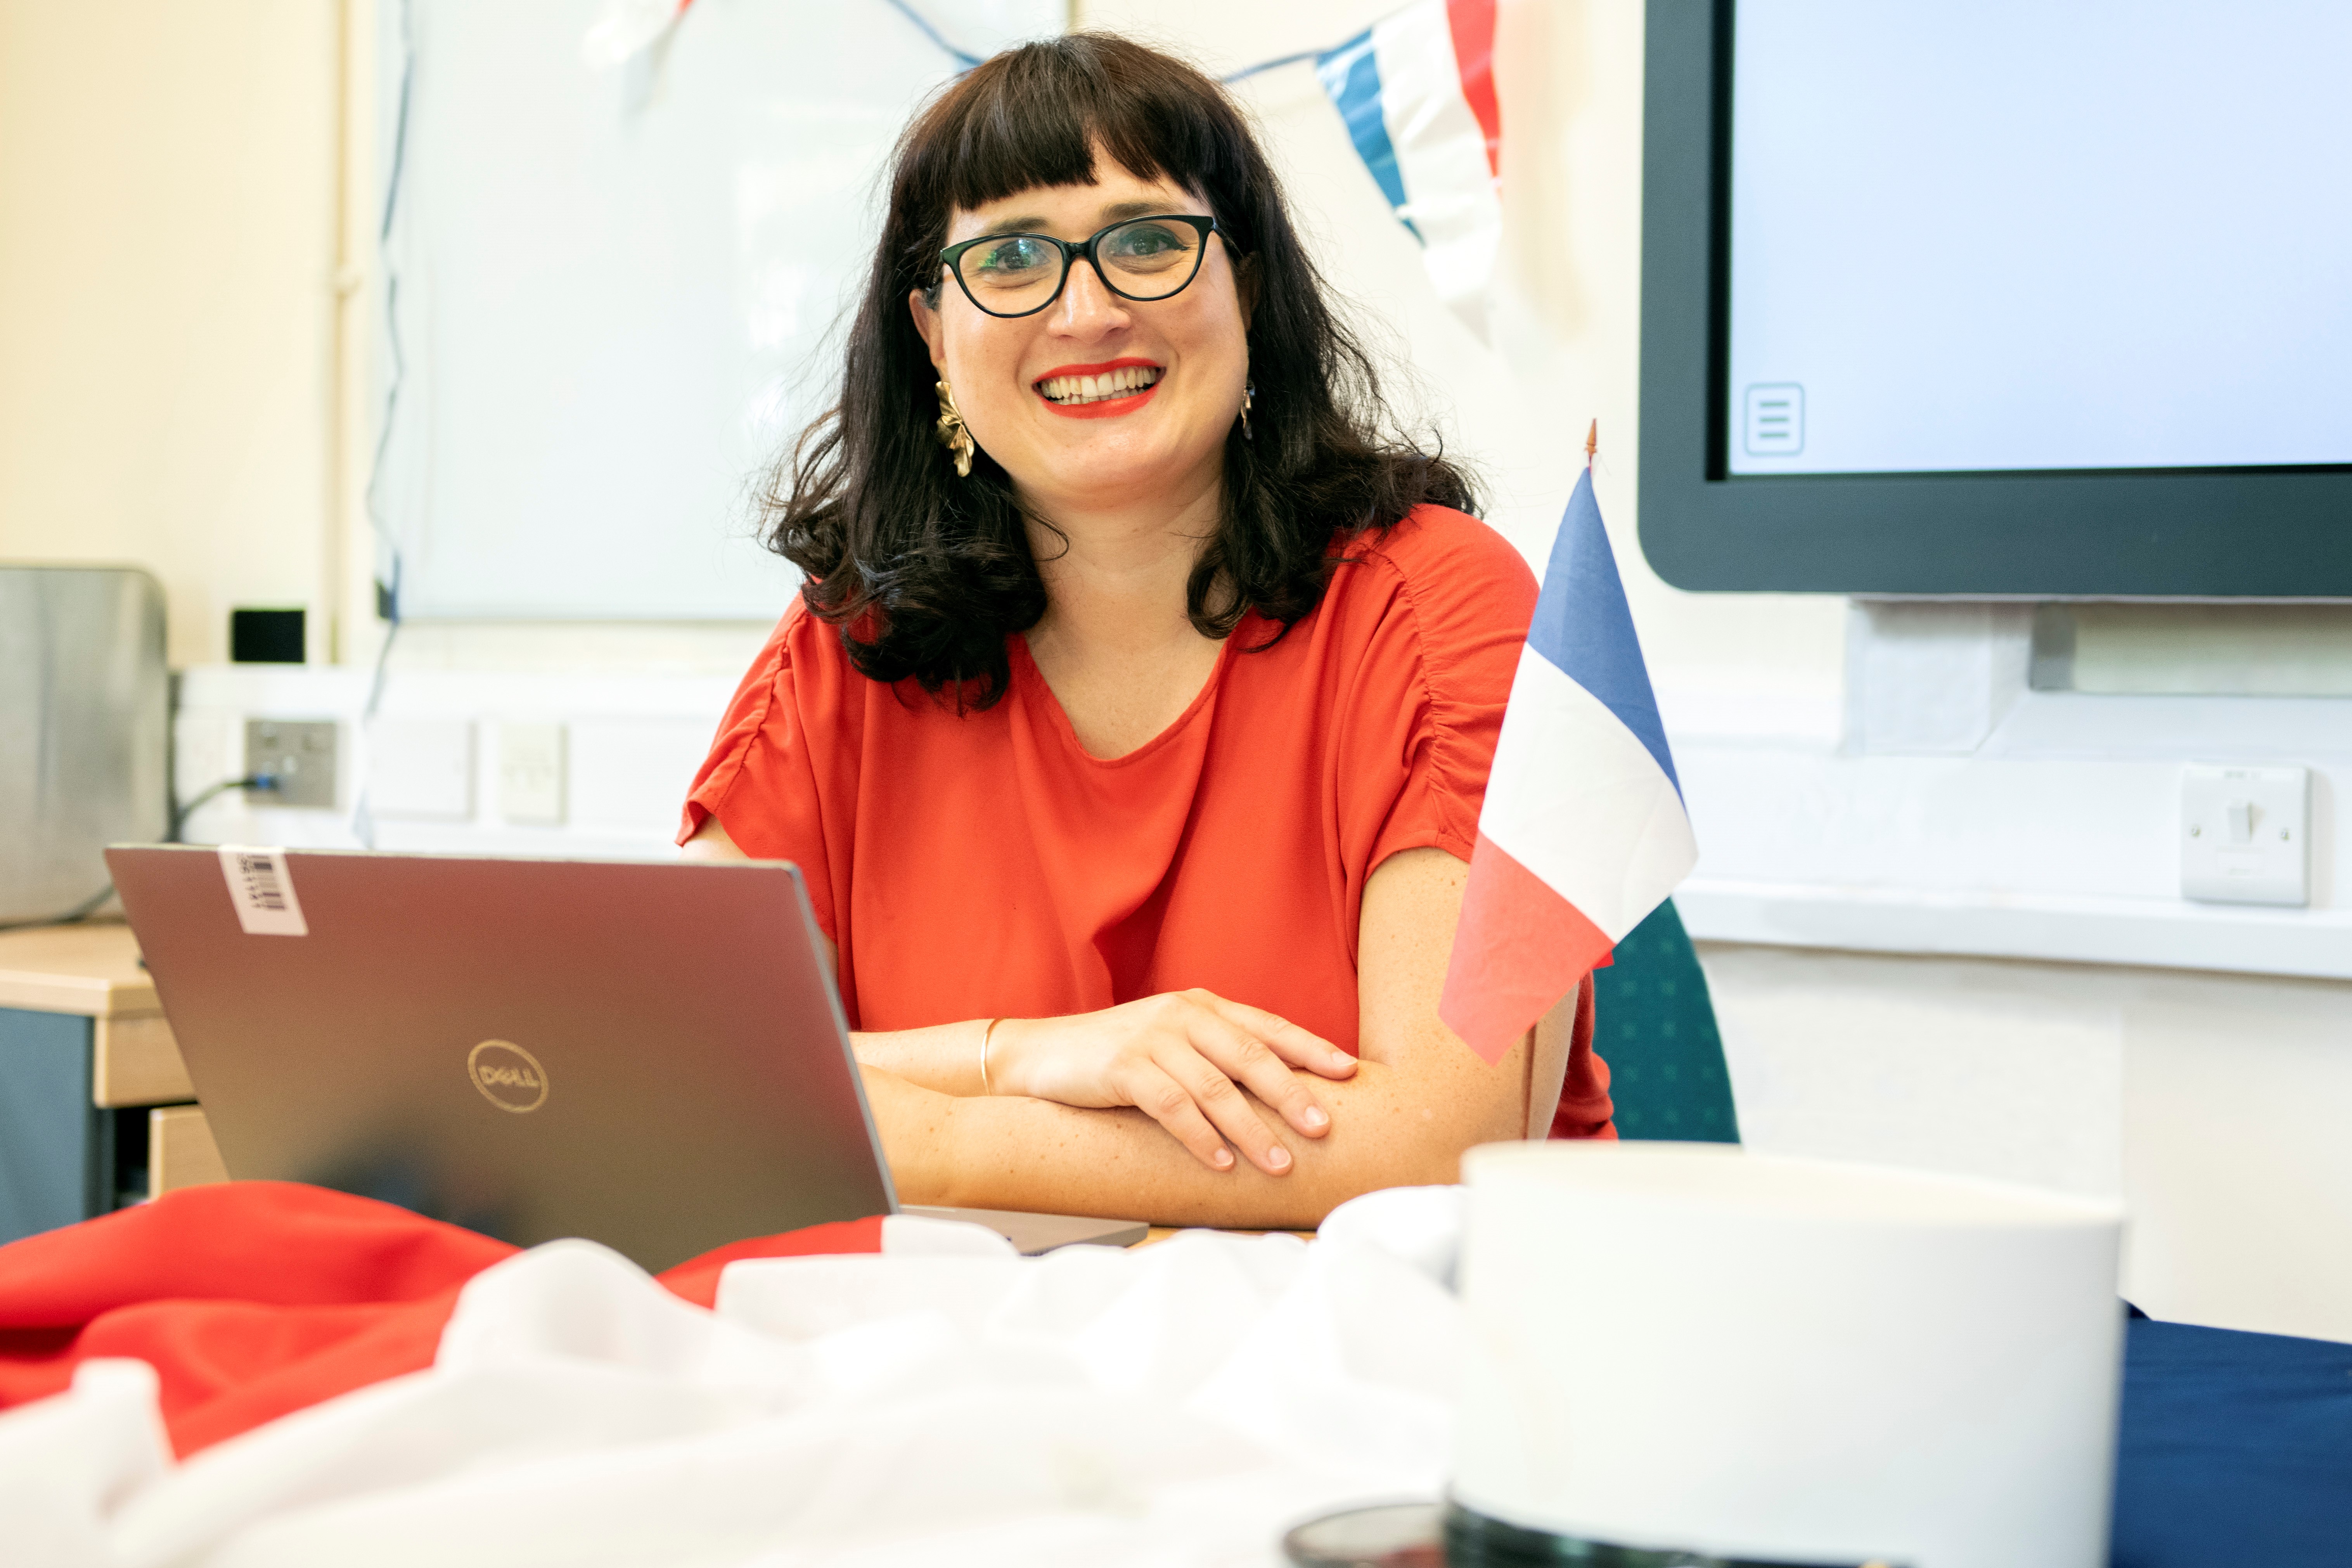 A woman in a red top and glasses sat at a desk with red, white and blue bunting in the background and a French flag on the desk.